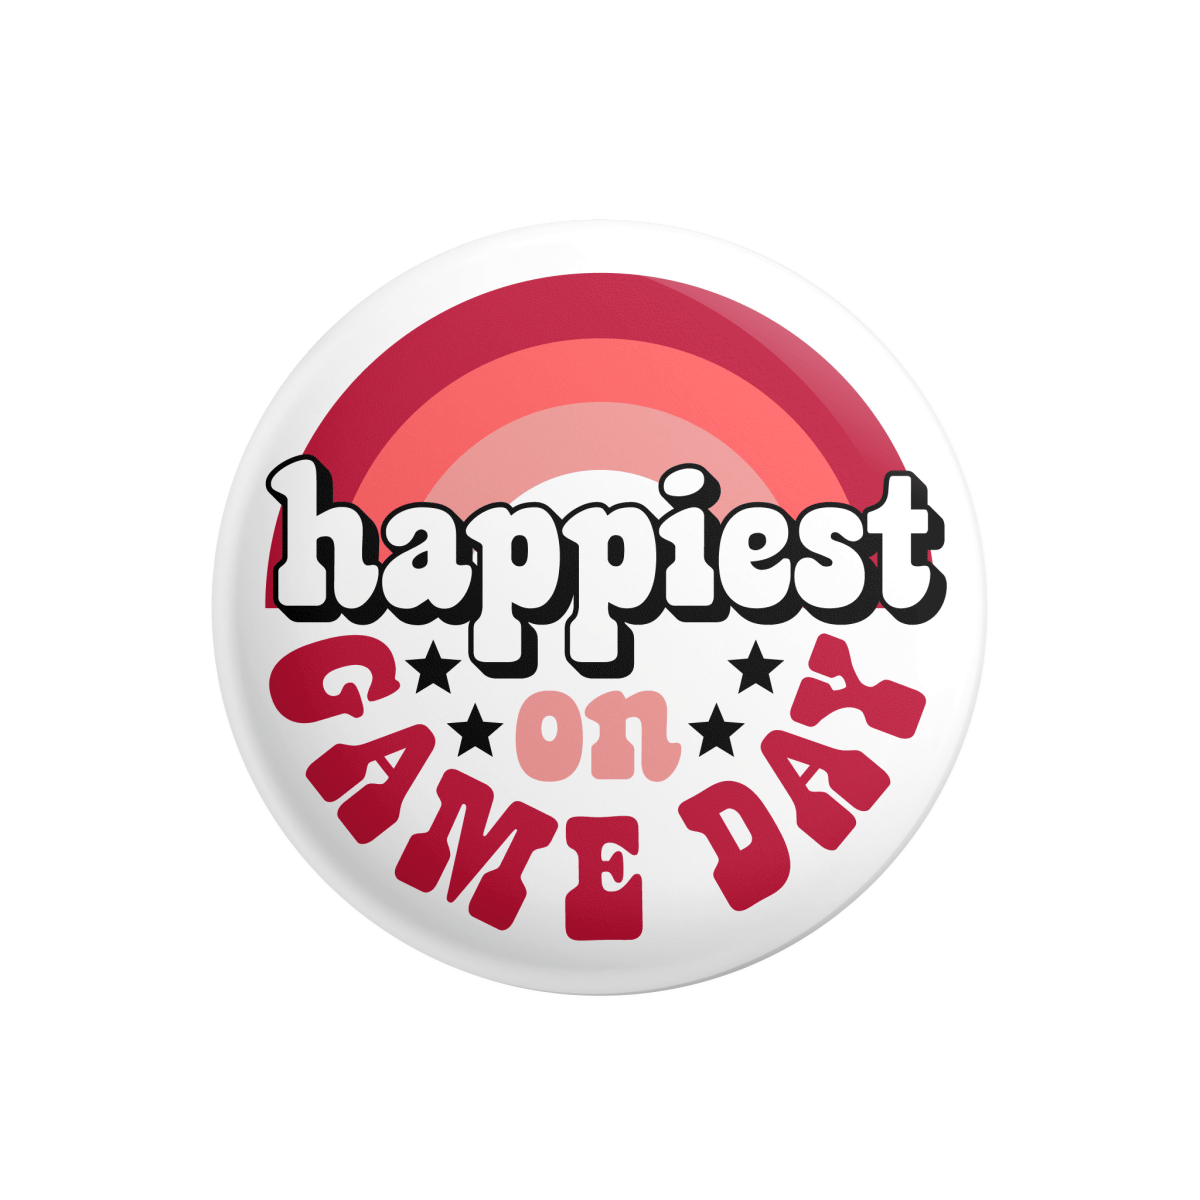 UGA Happiest Gameday Button - Shop B-Unlimited